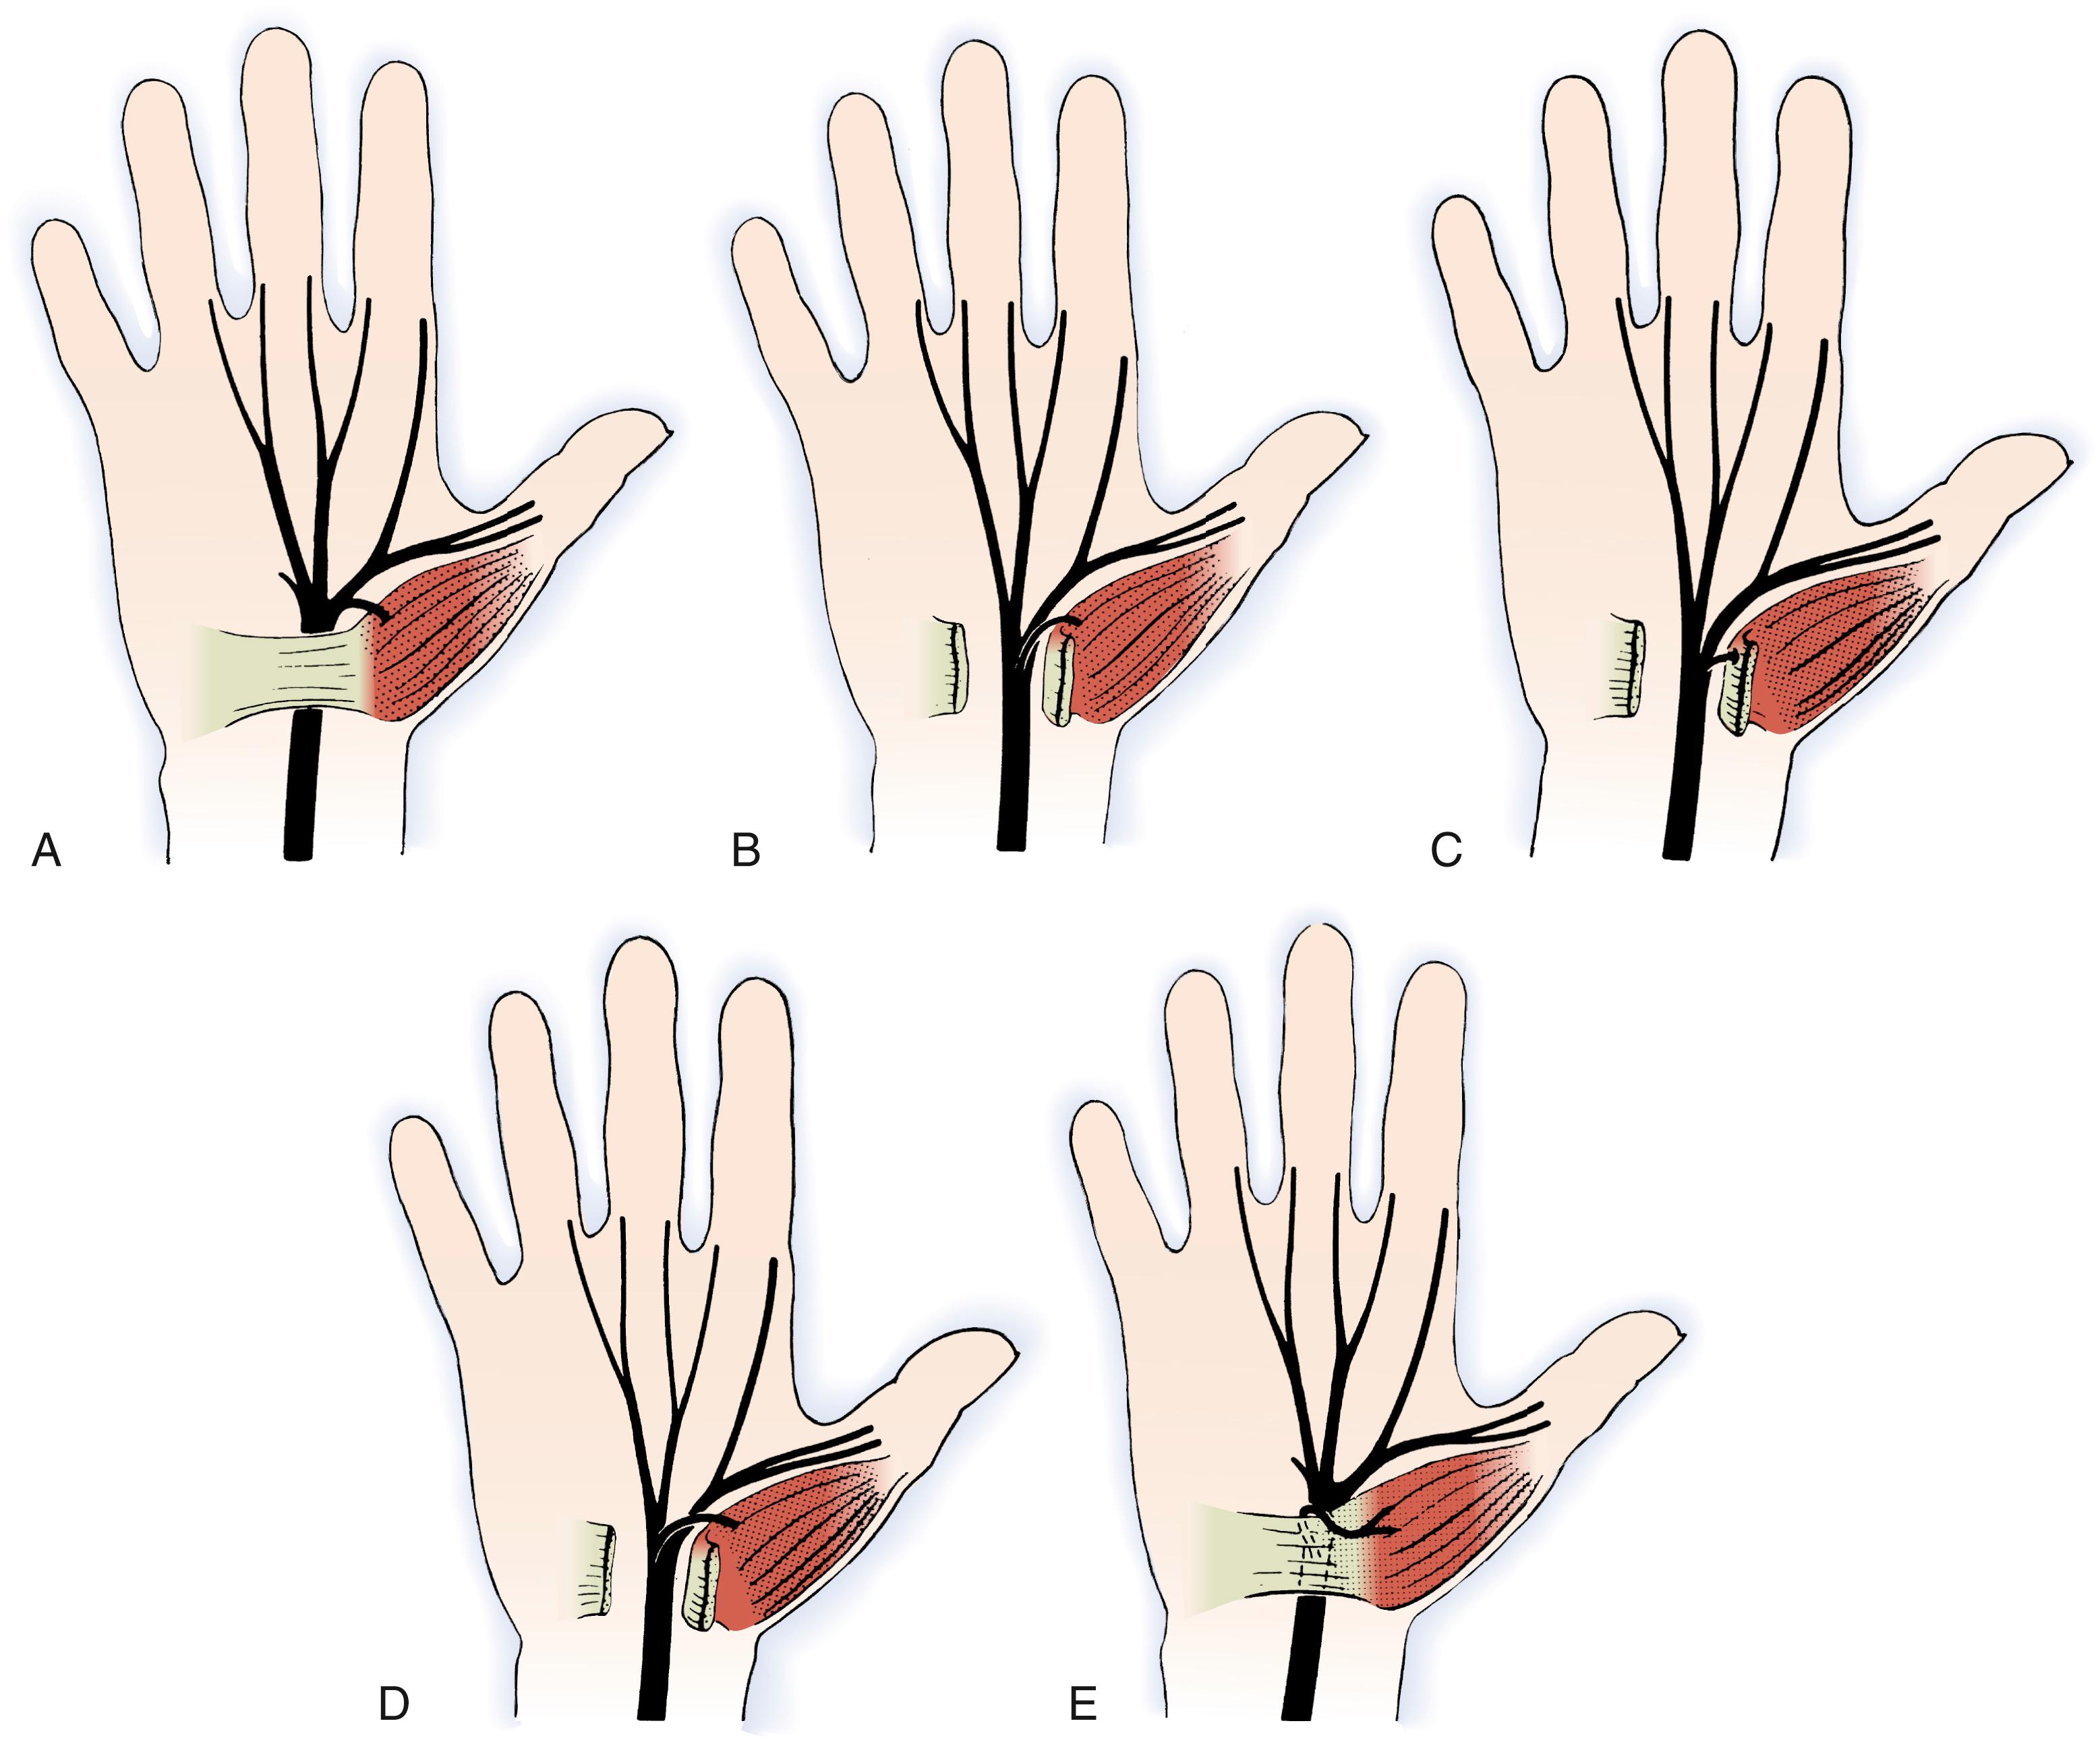 Fig. 28.5, Variations in median nerve anatomy in the carpal tunnel. A, The most common pattern of the motor branch is extraligamentous and recurrent. B, Subligamentous branching of a recurrent median nerve. C, Transligamentous course of the recurrent branch of the median nerve. D, The motor branch can uncommonly originate from the ulnar border of the median nerve. E, The motor branch can lie on top of the transverse carpal ligament.